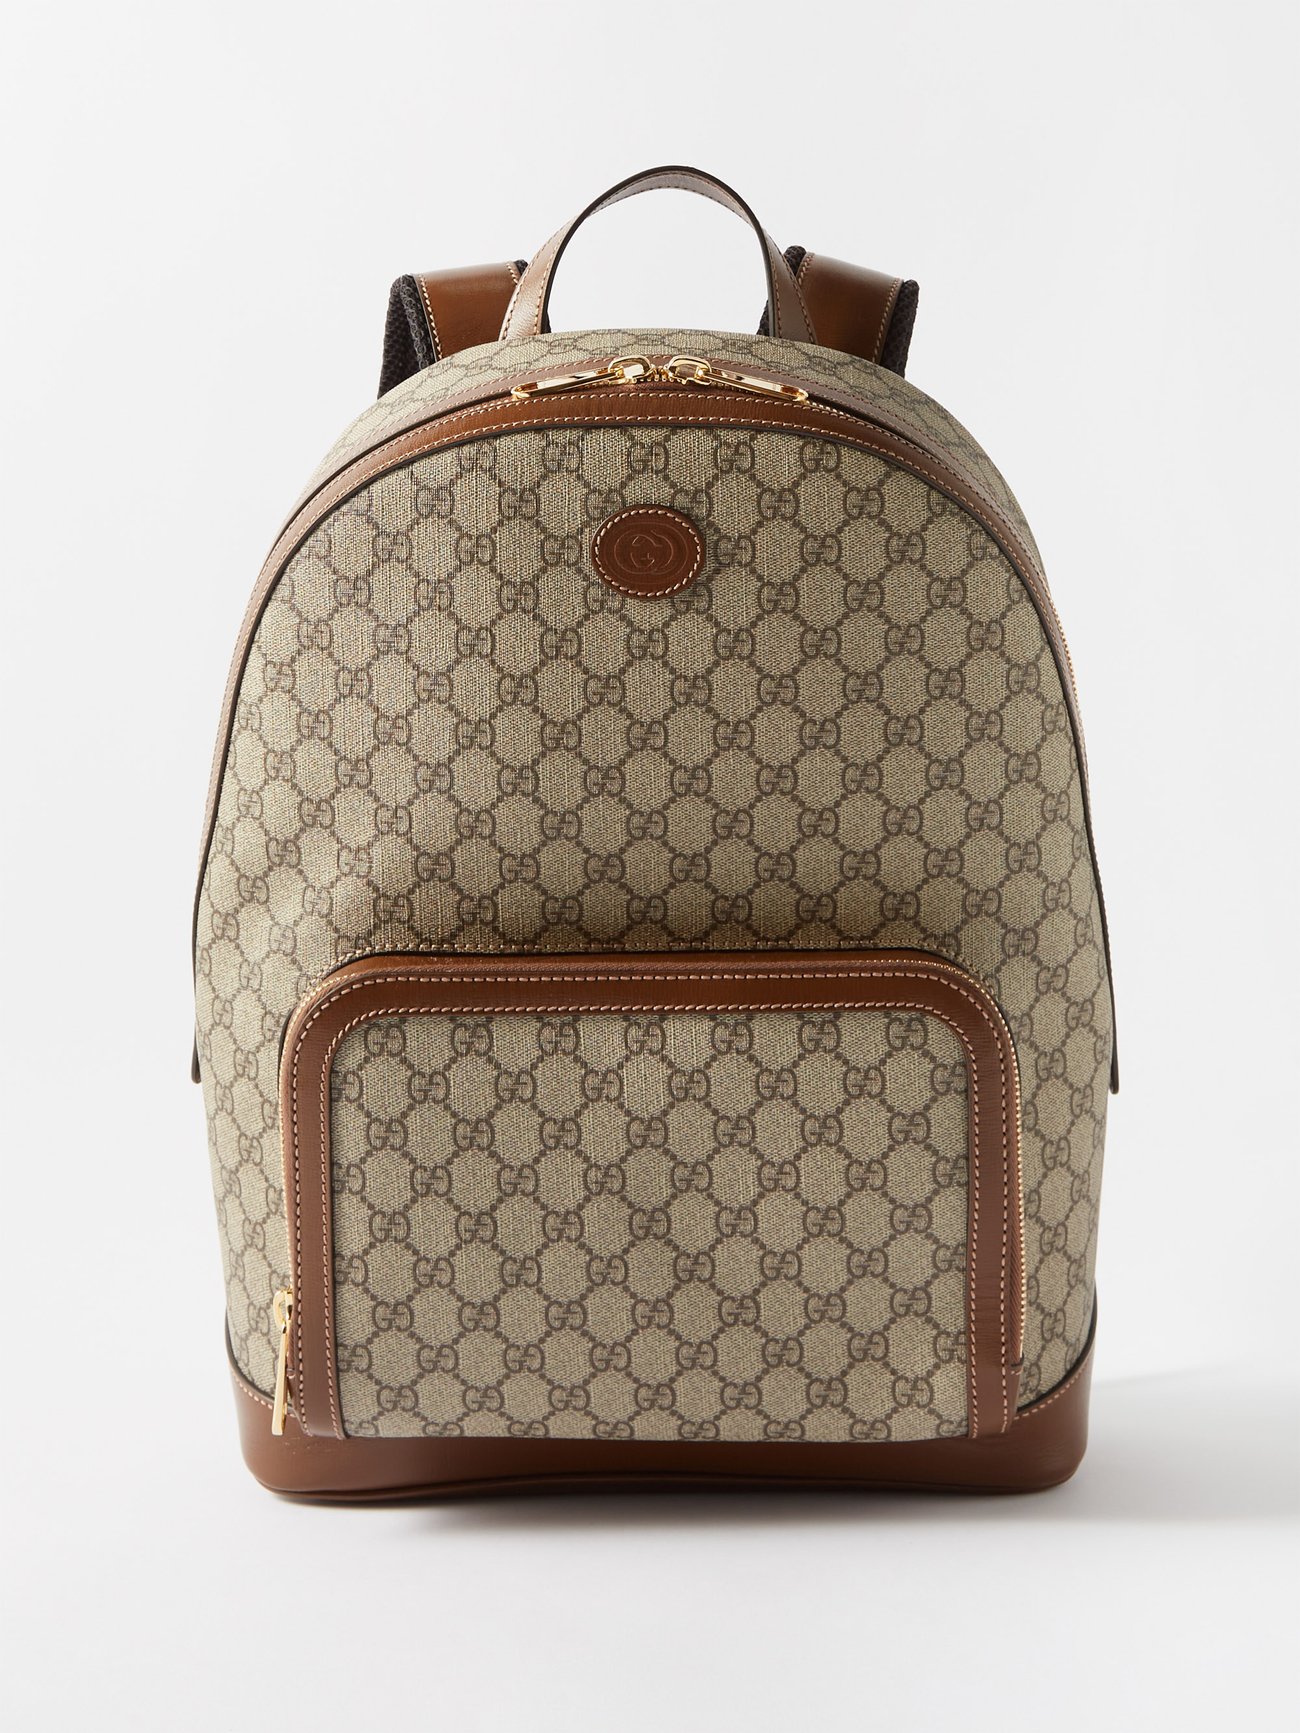 Brown GG Supreme leather-trimmed canvas backpack, Gucci